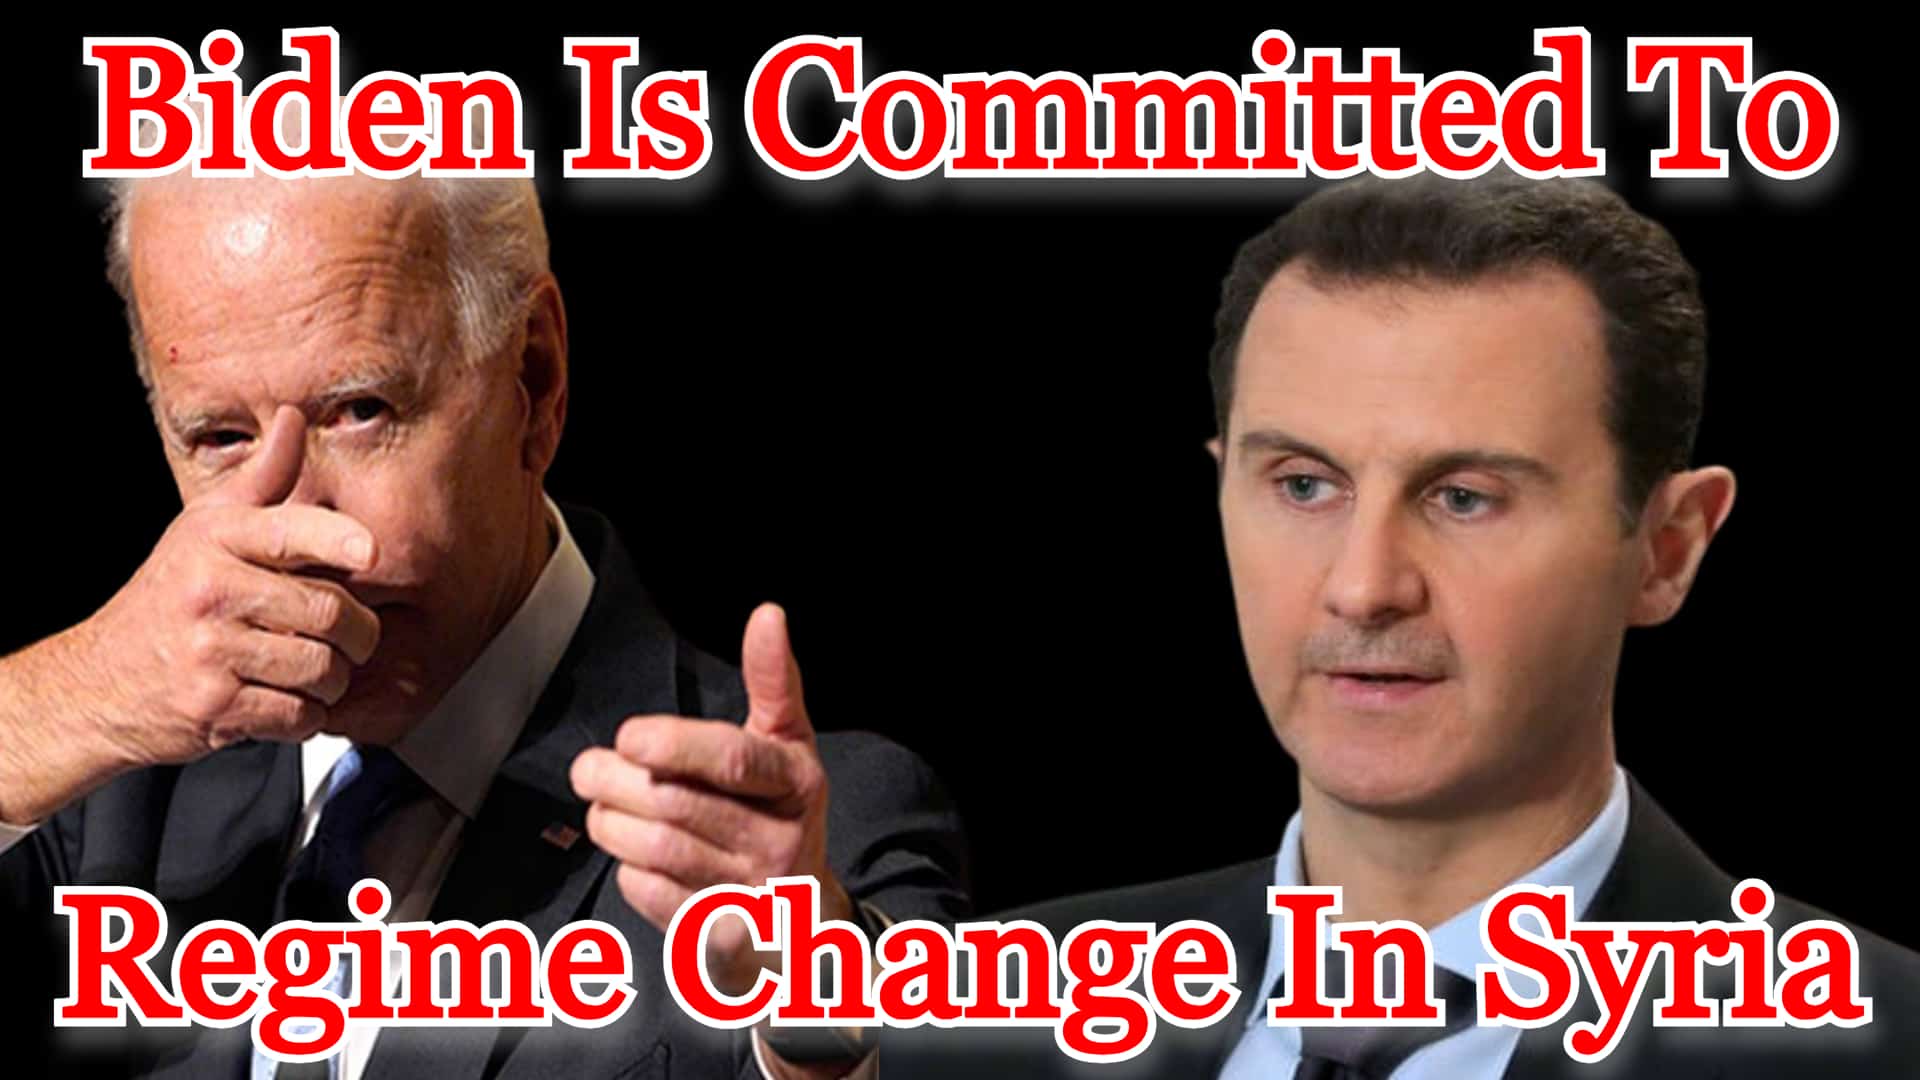 COI #443: Biden Is Committed to Regime Change in Syria